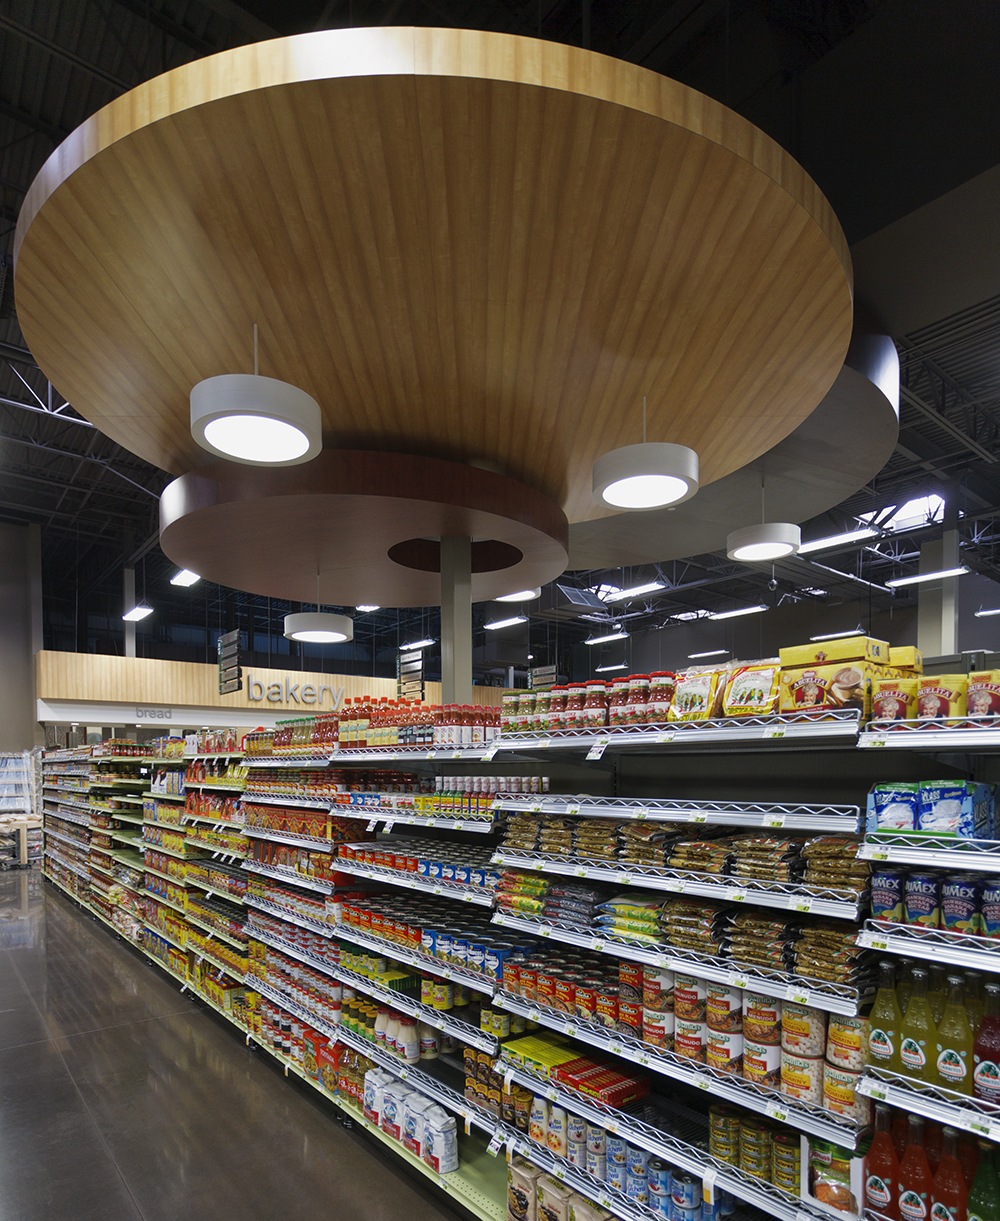 Omnience fixtures are good for retail lighting designs, seen here above the shelves of a modern grocery store.